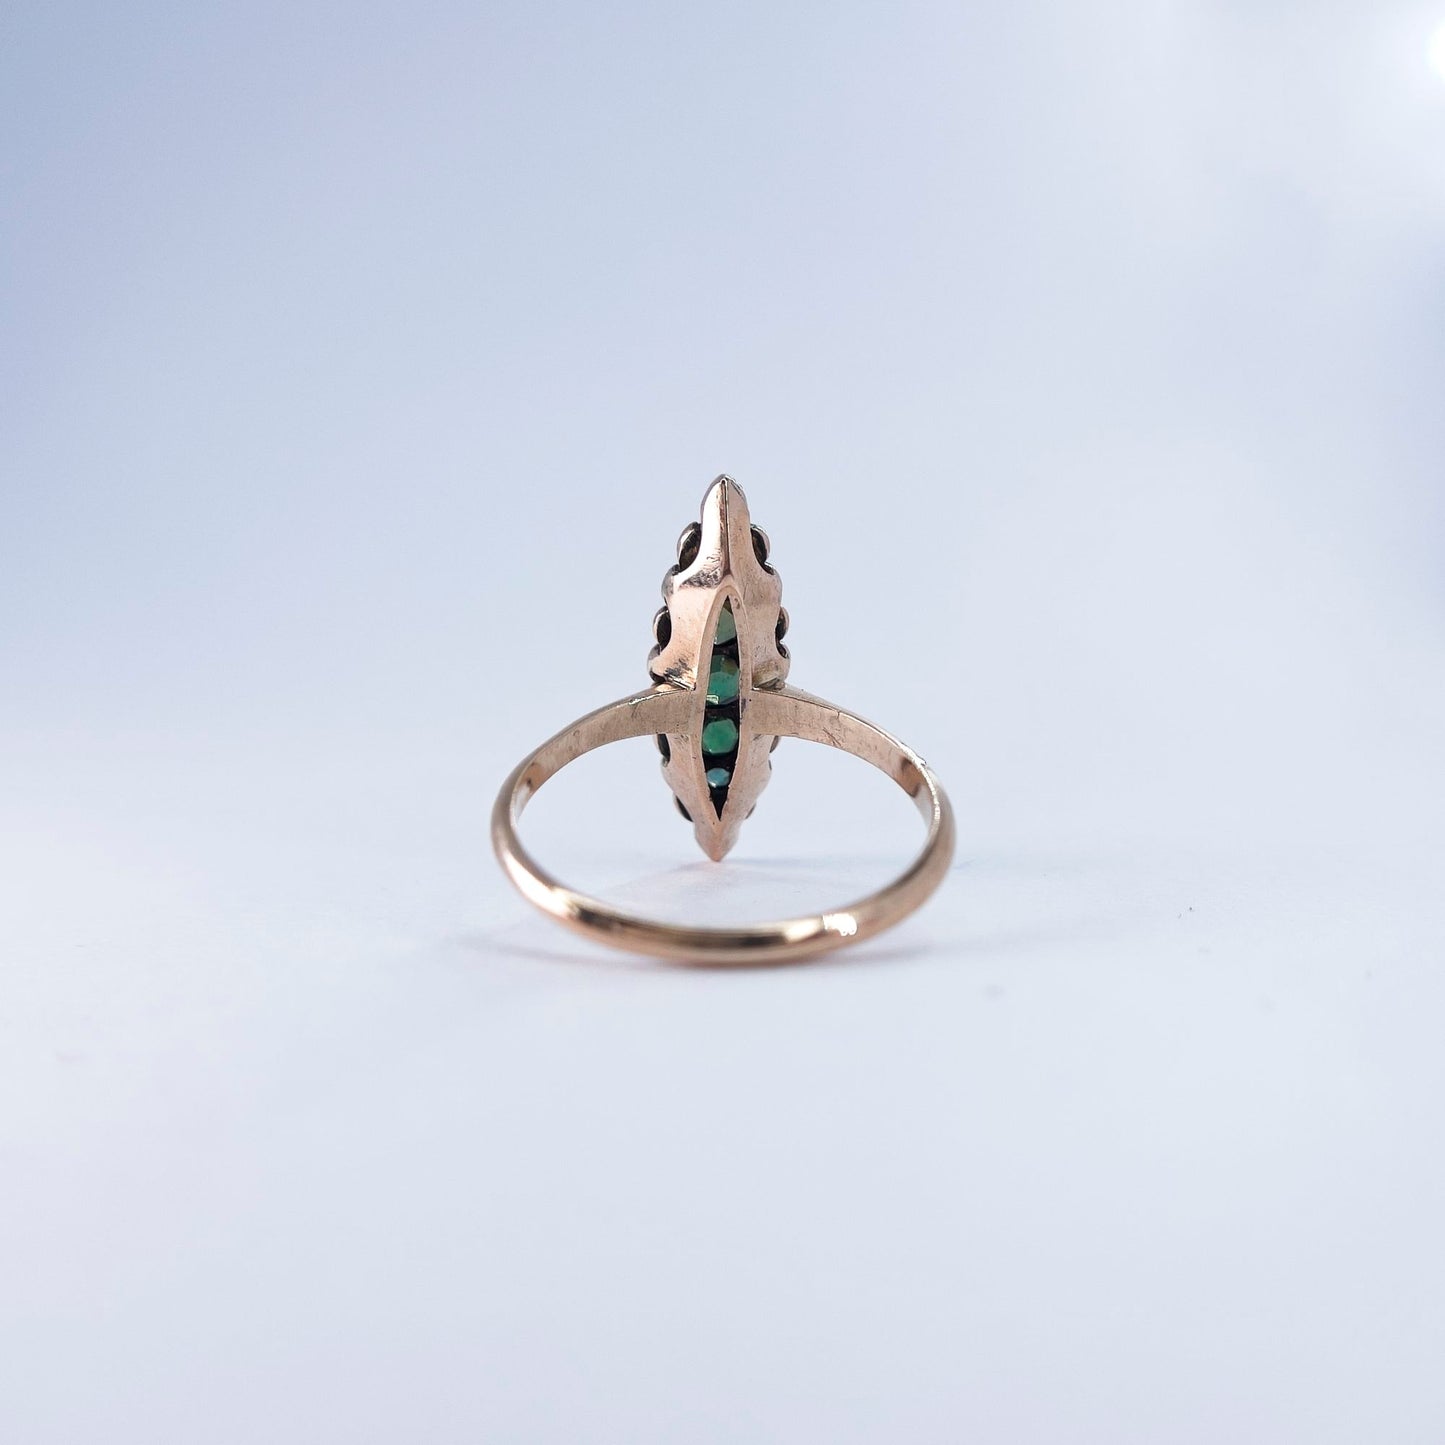 1800s Marquise Dainty Single Cut Diamond and Russian Tsavorite Ring in 14K Rose Gold